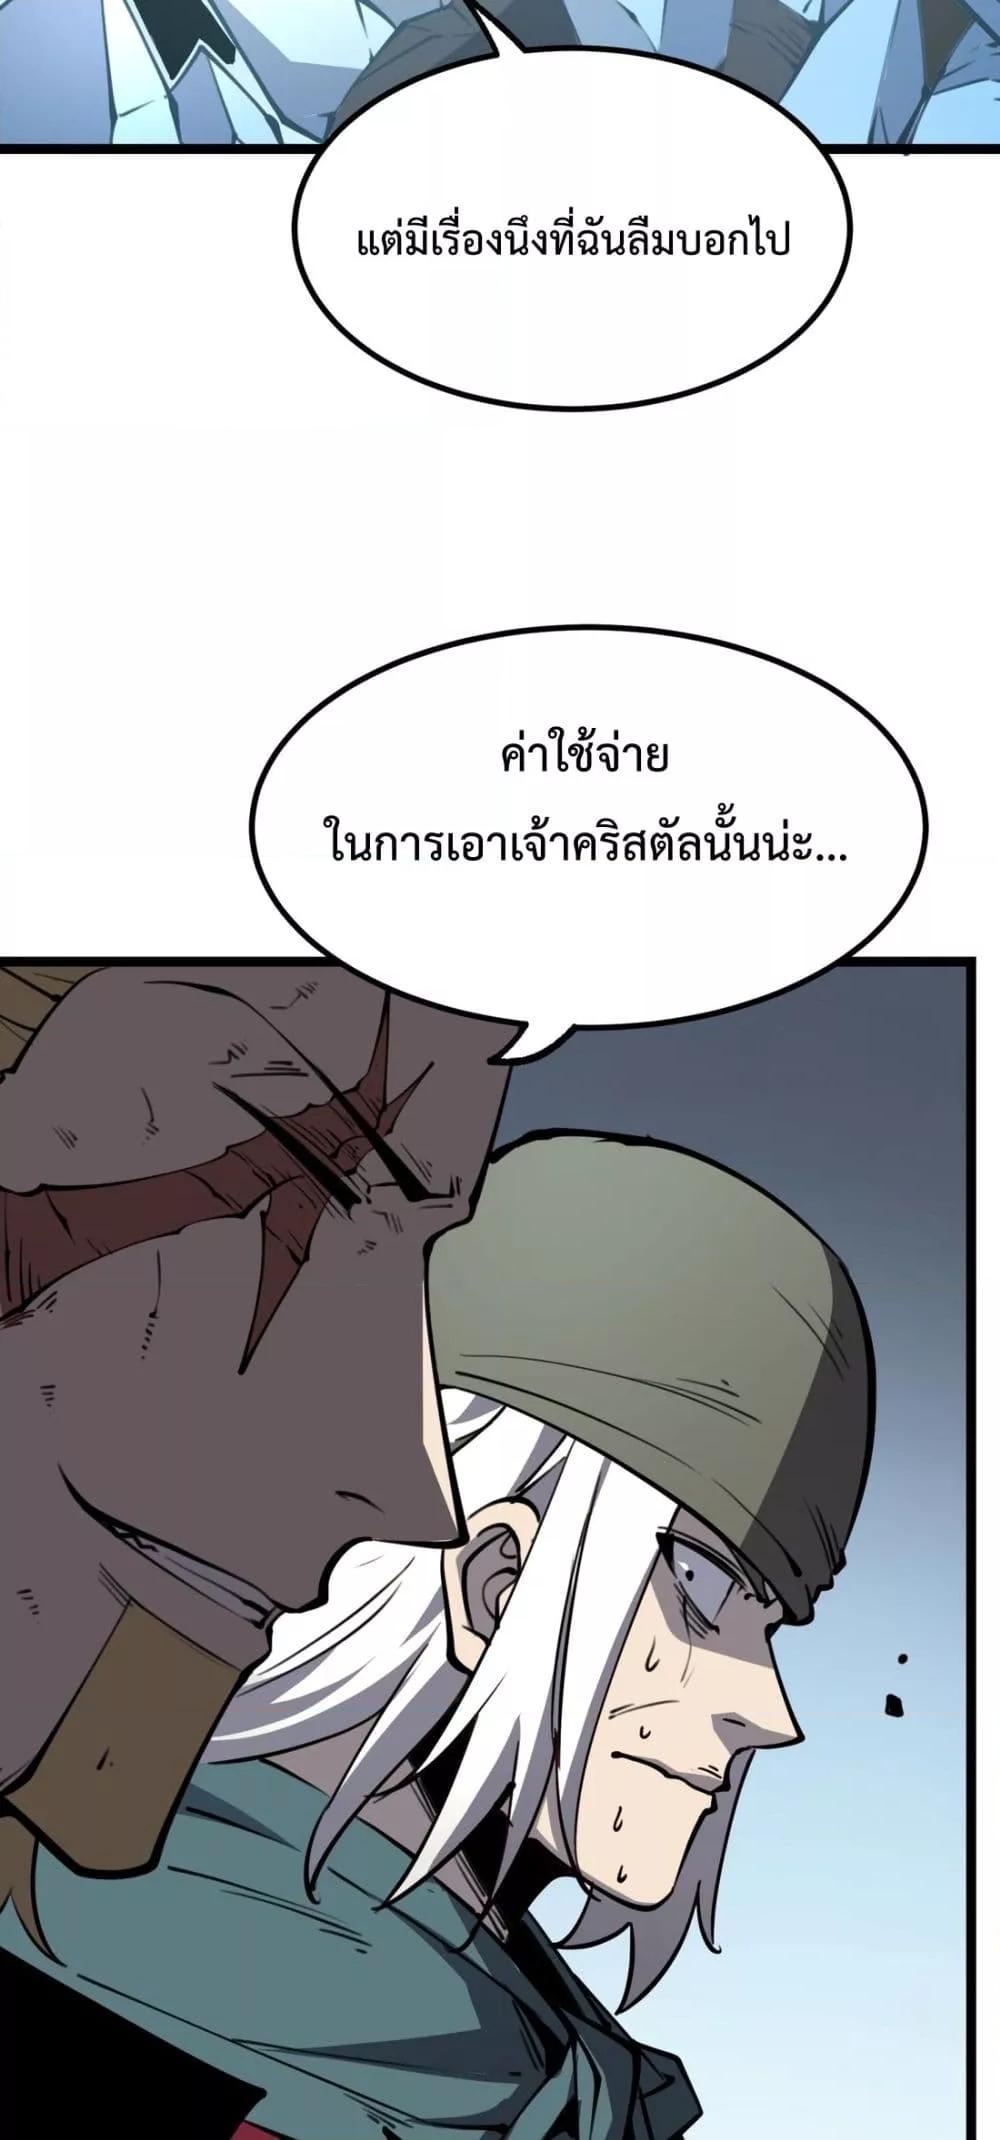 I Became The King by Scavenging เธ•เธญเธเธ—เธตเน 15 (14)